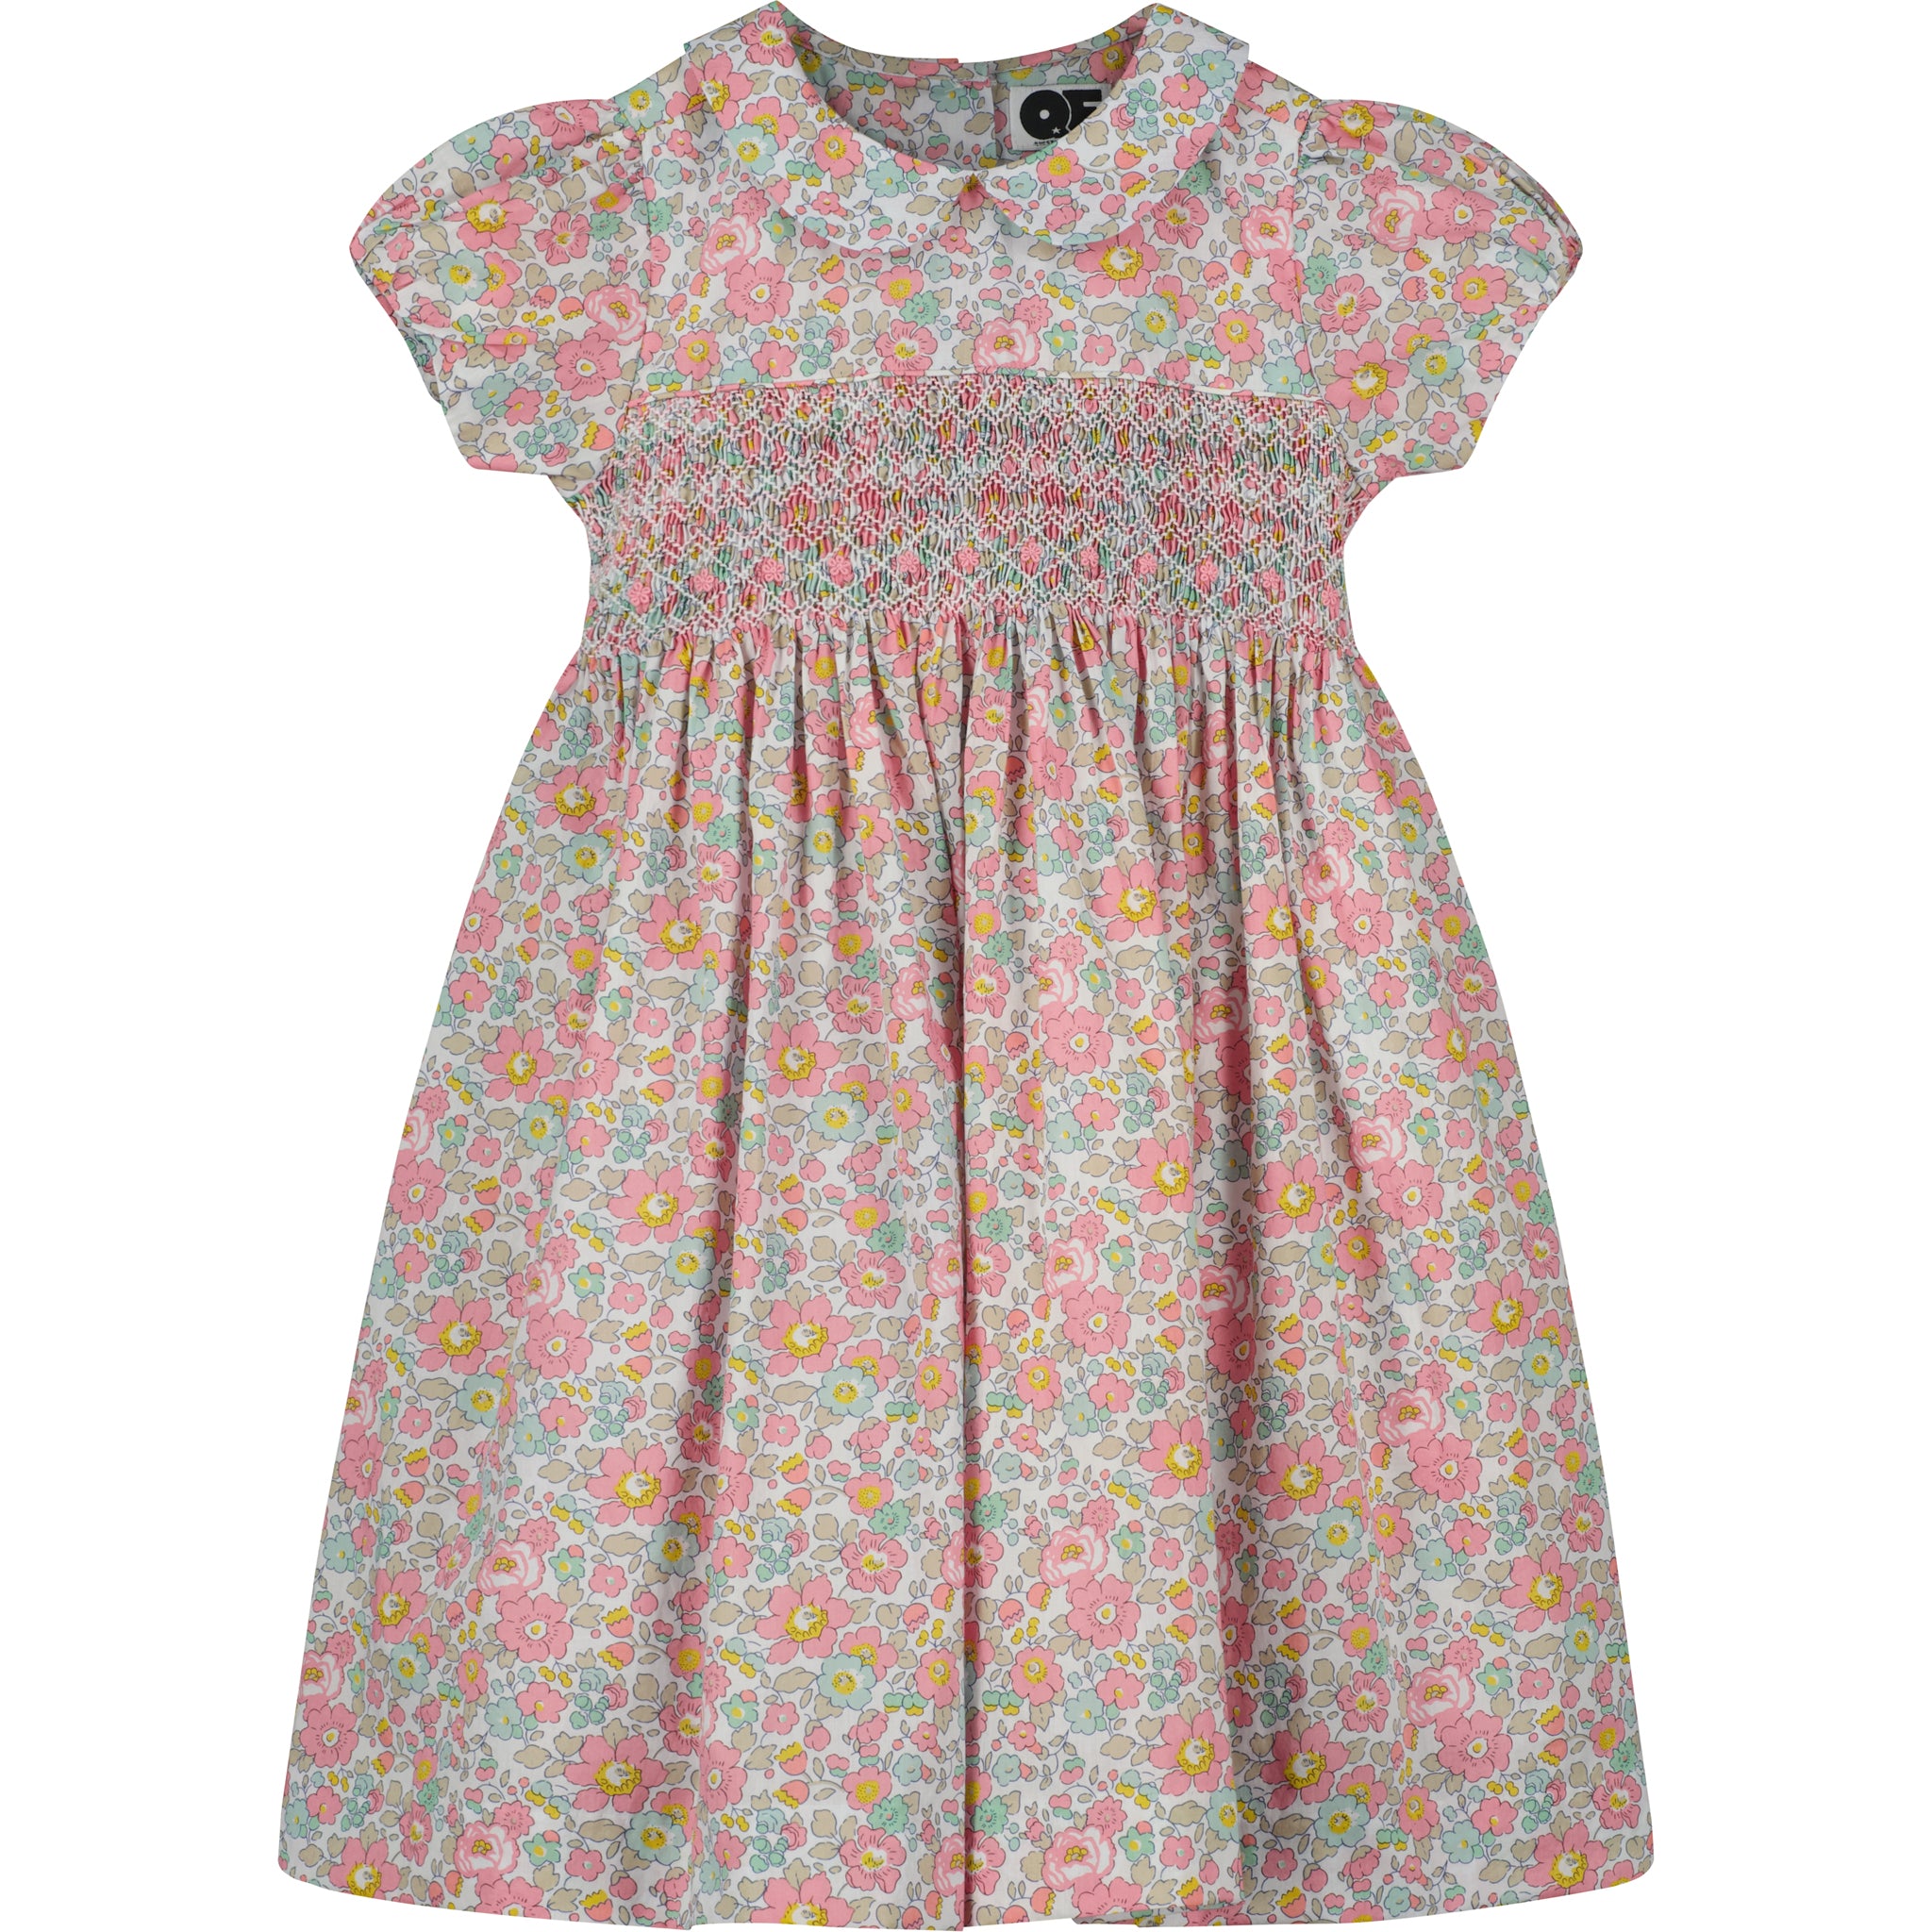 smocked dress made with Liberty print fabric, front